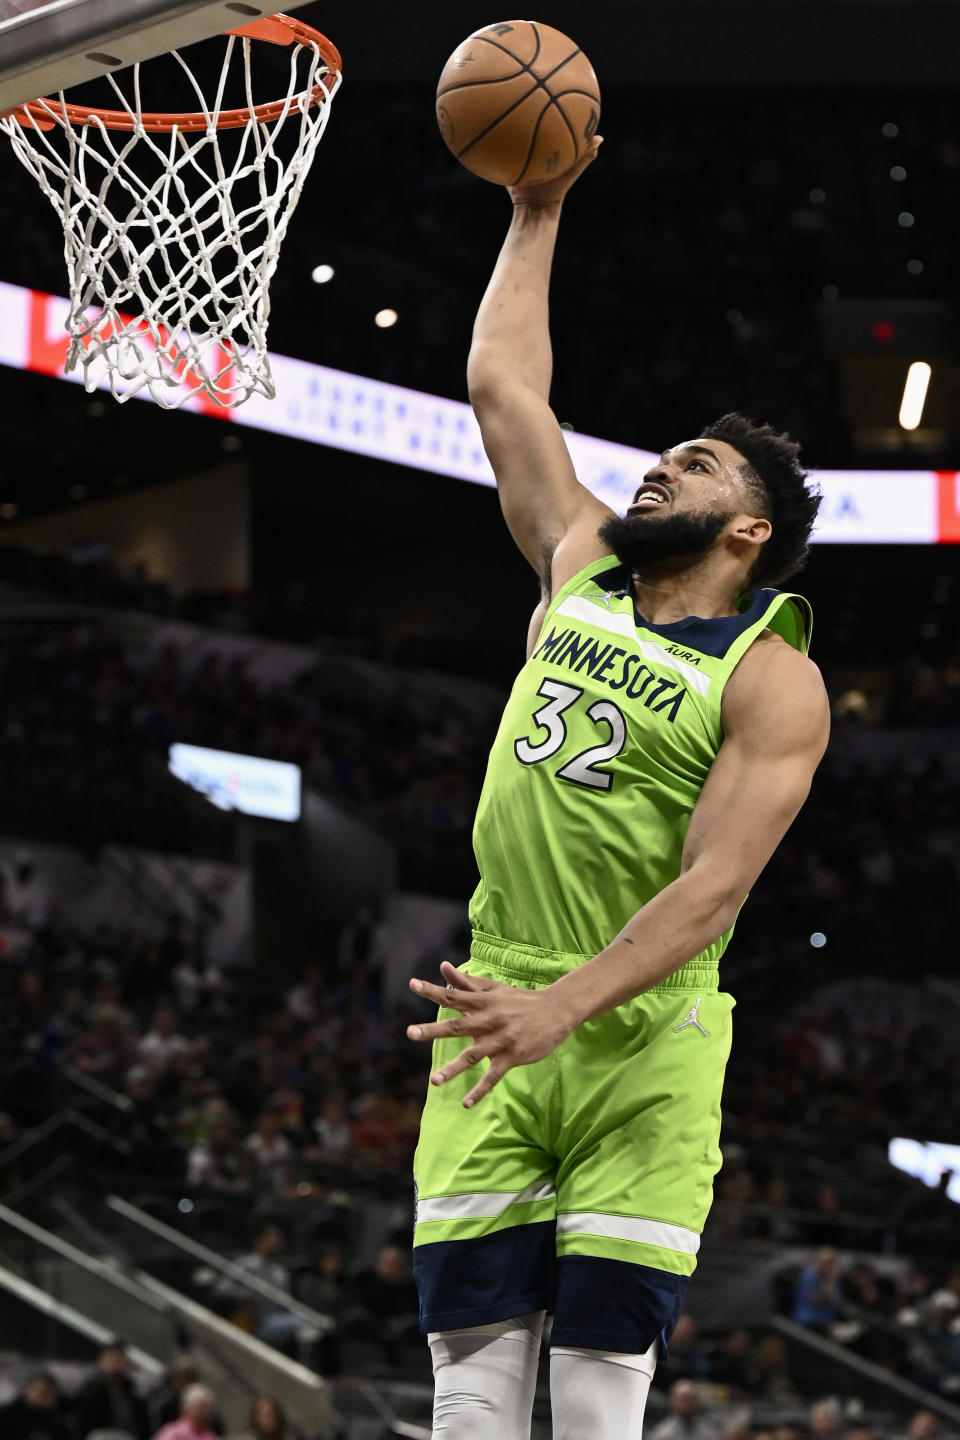 Minnesota Timberwolves' Karl-Anthony Towns dunks during the first half of an NBA basketball game against the San Antonio Spurs on Monday, March 14, 2022, in San Antonio. (AP Photo/Darren Abate)